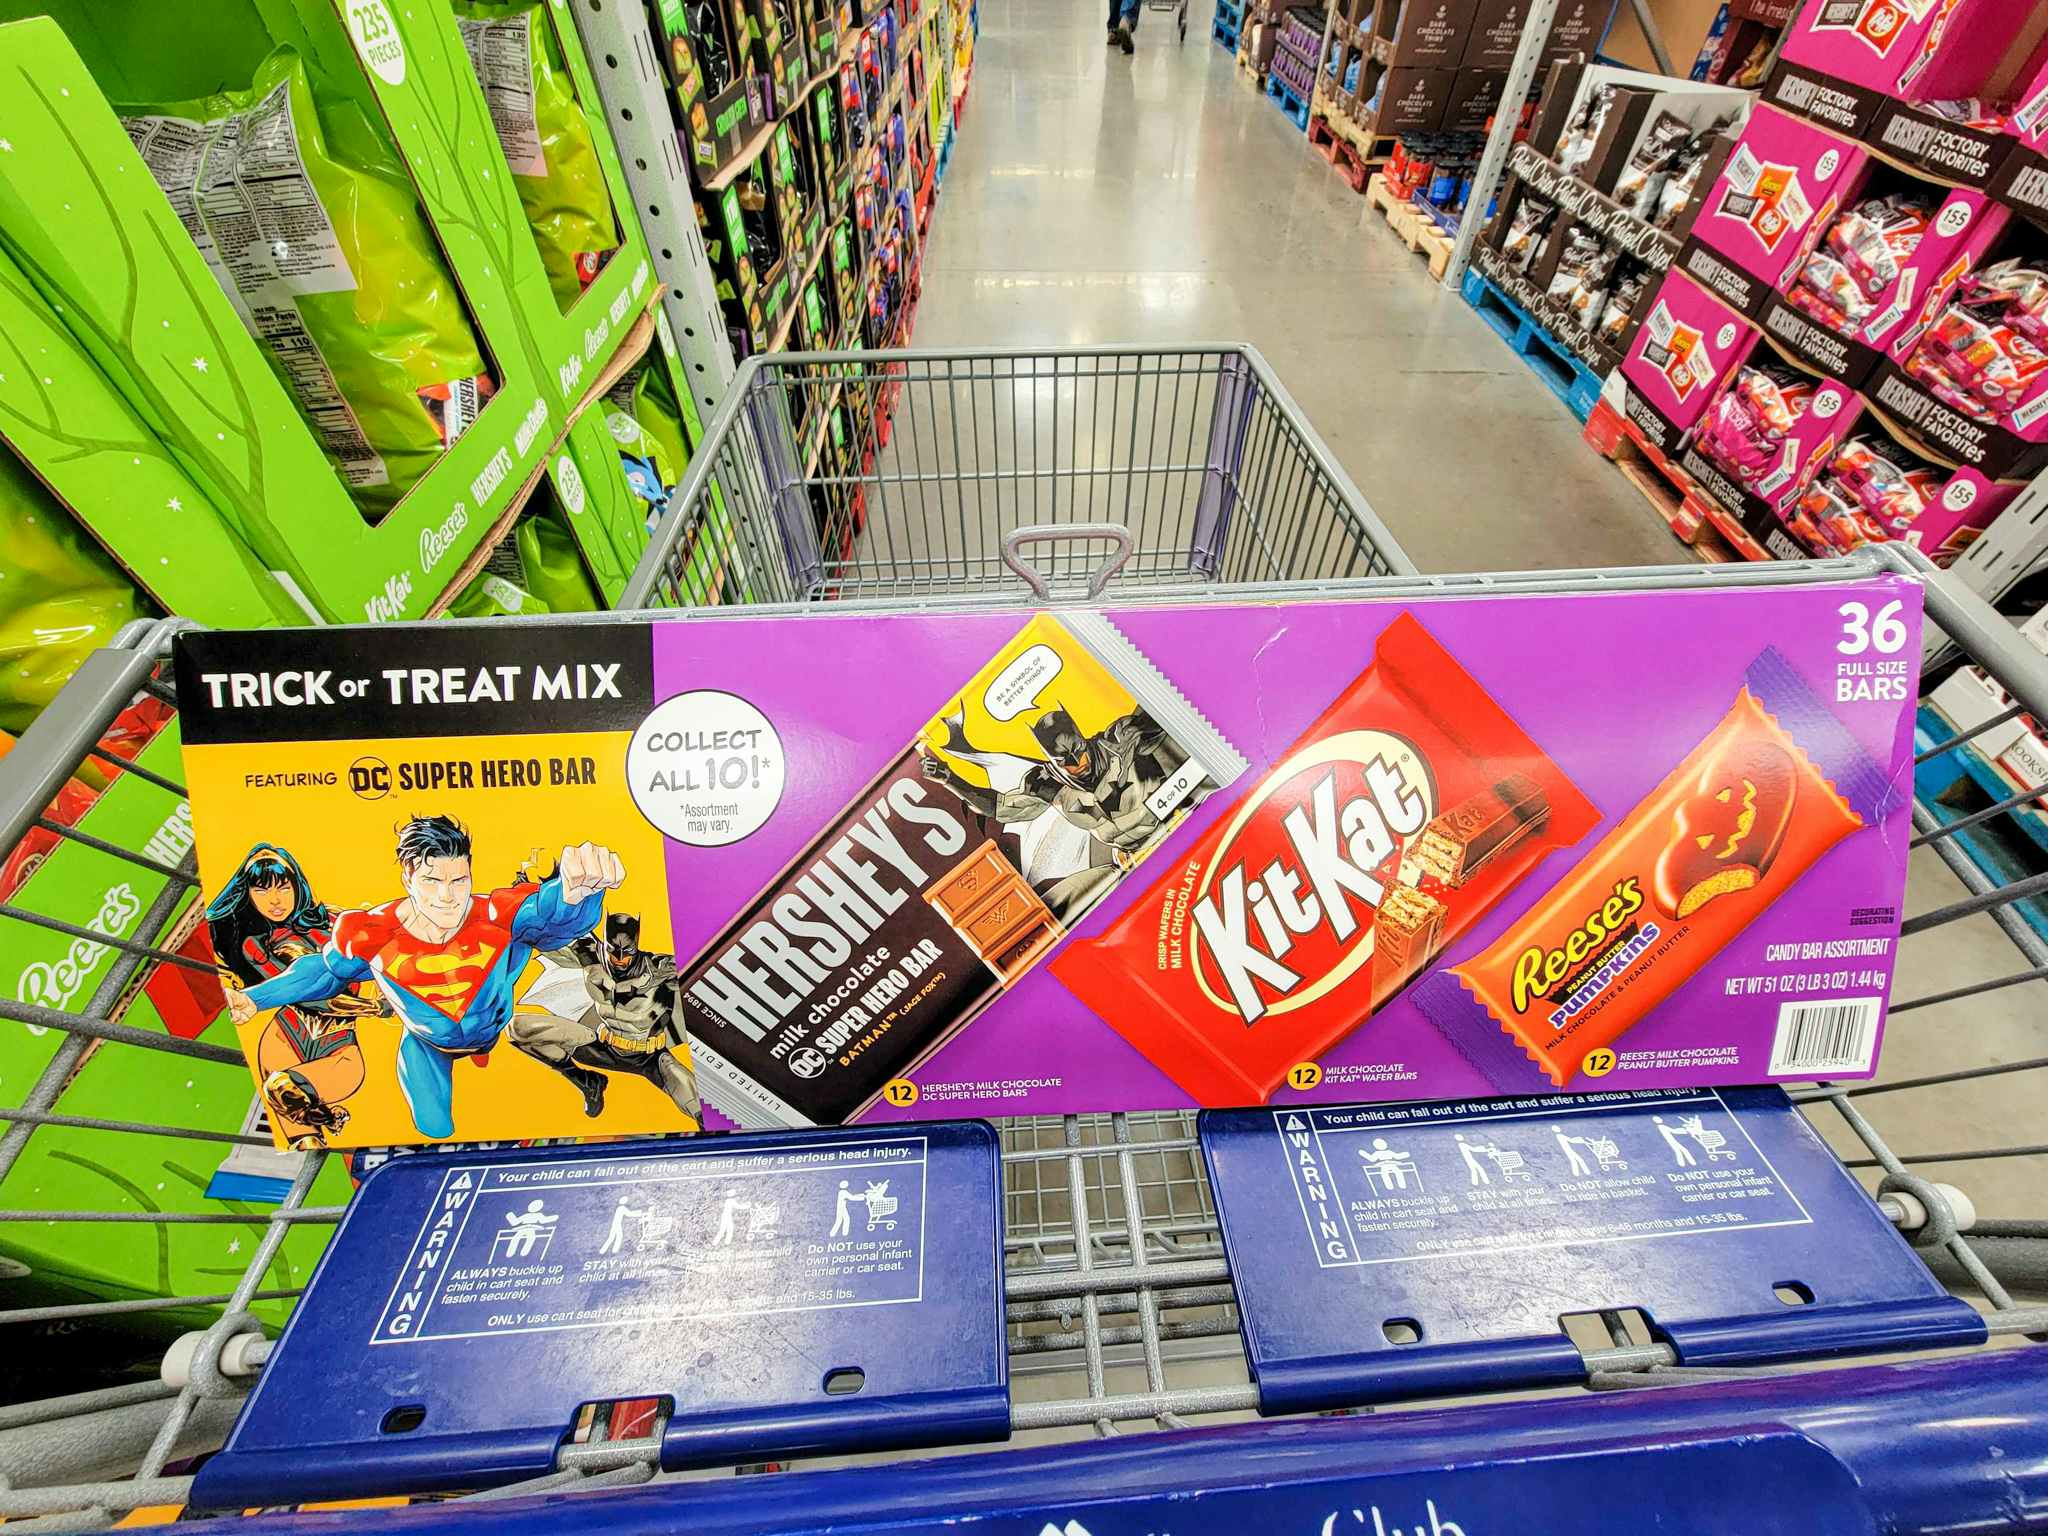 box of full size candy bars for halloween in a cart